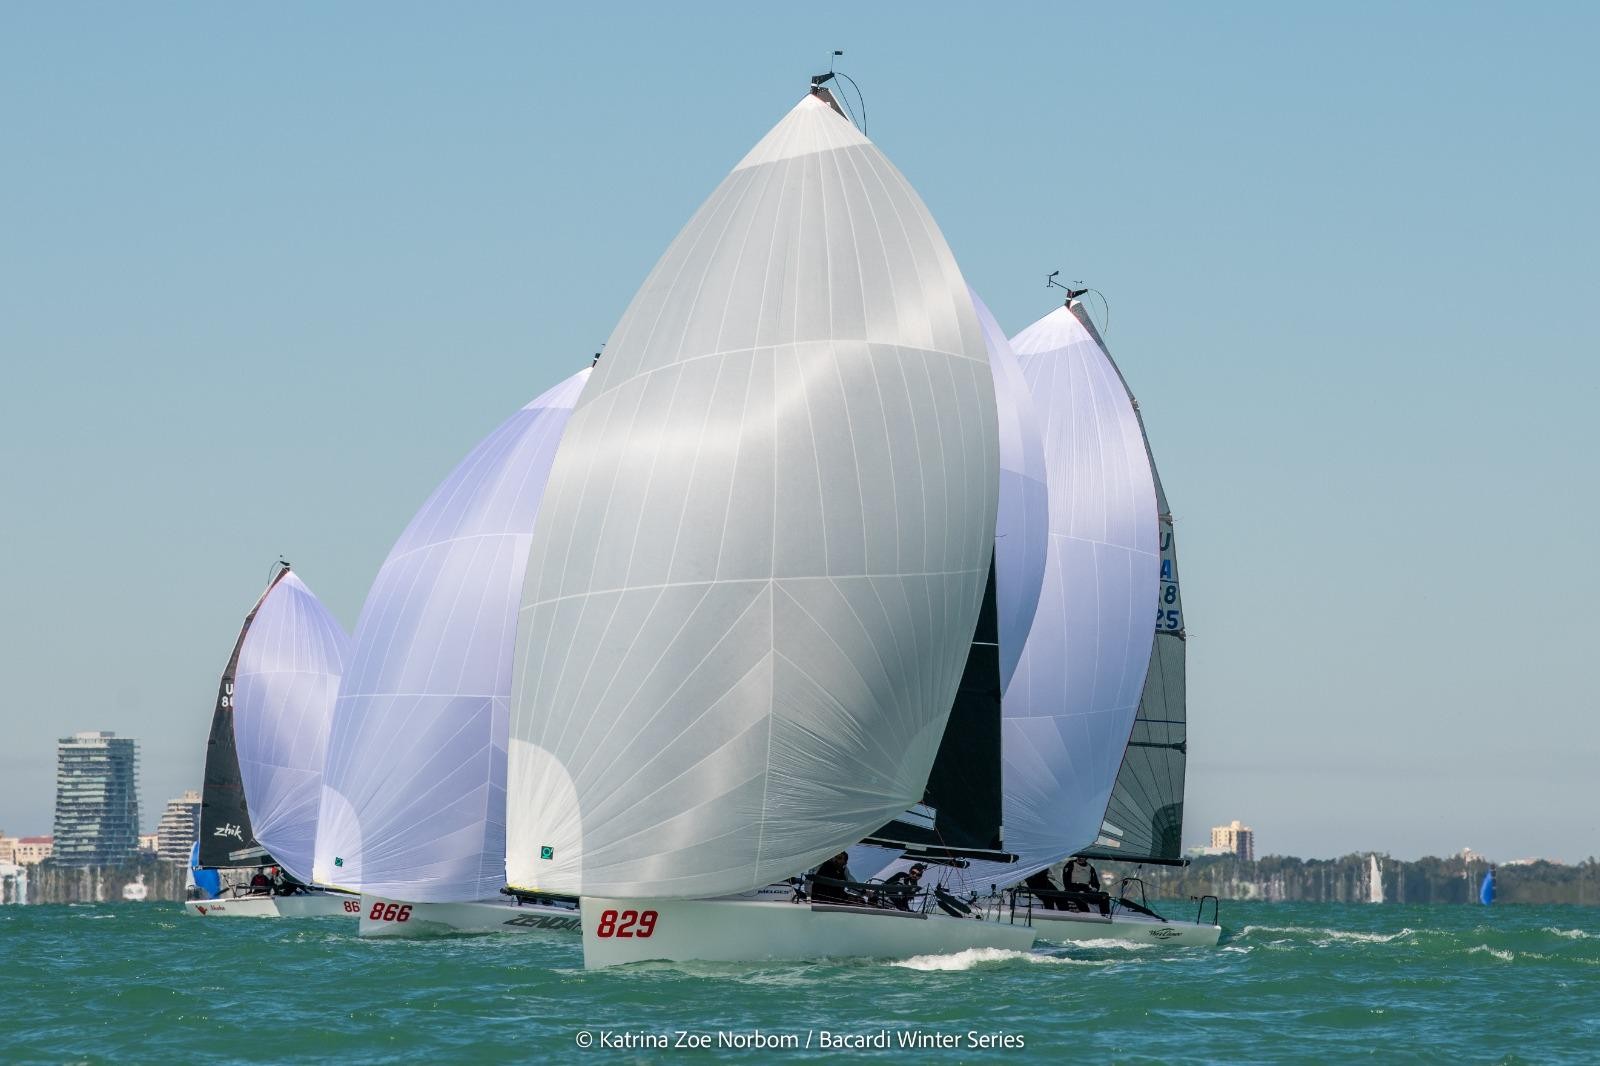 The Miami breeze crowns j/70, Melges 24 and 69F winners in a light wind conclusion to Bacardi Winter Series event 2